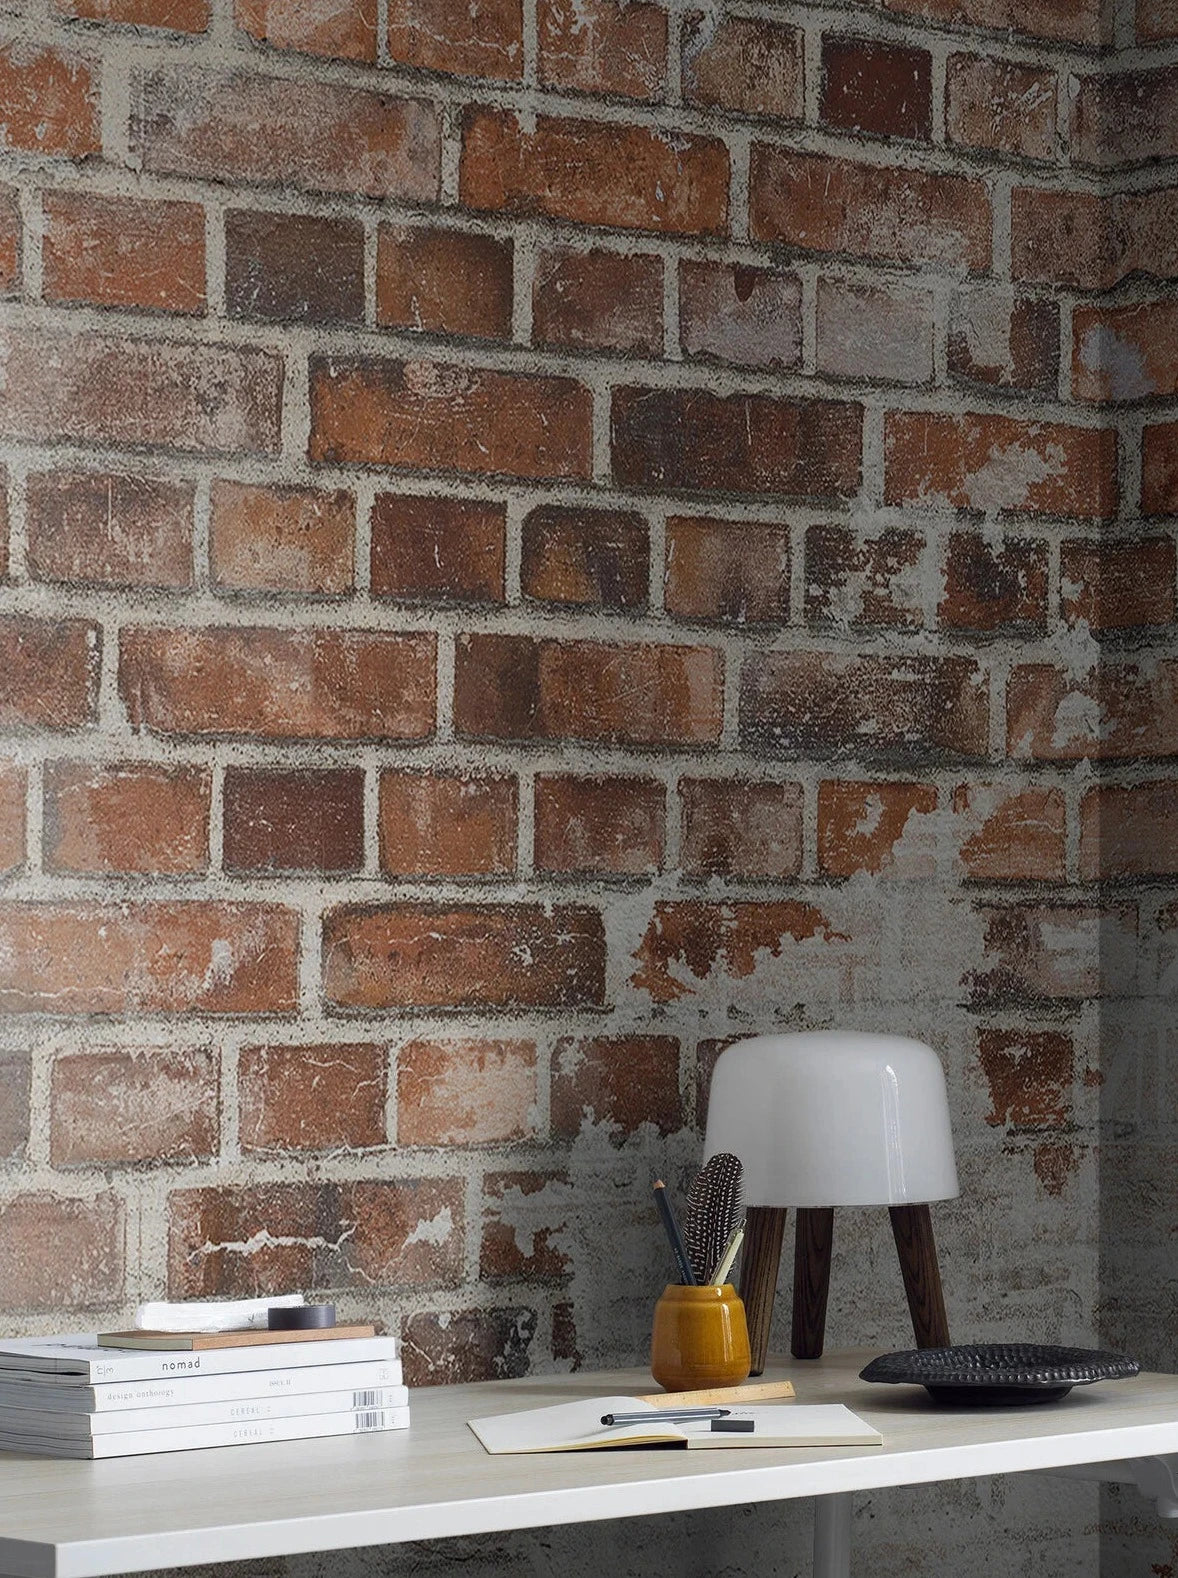 Weathered Bricks wallpaper makes a striking and stylish addition to on-trend interiors. 